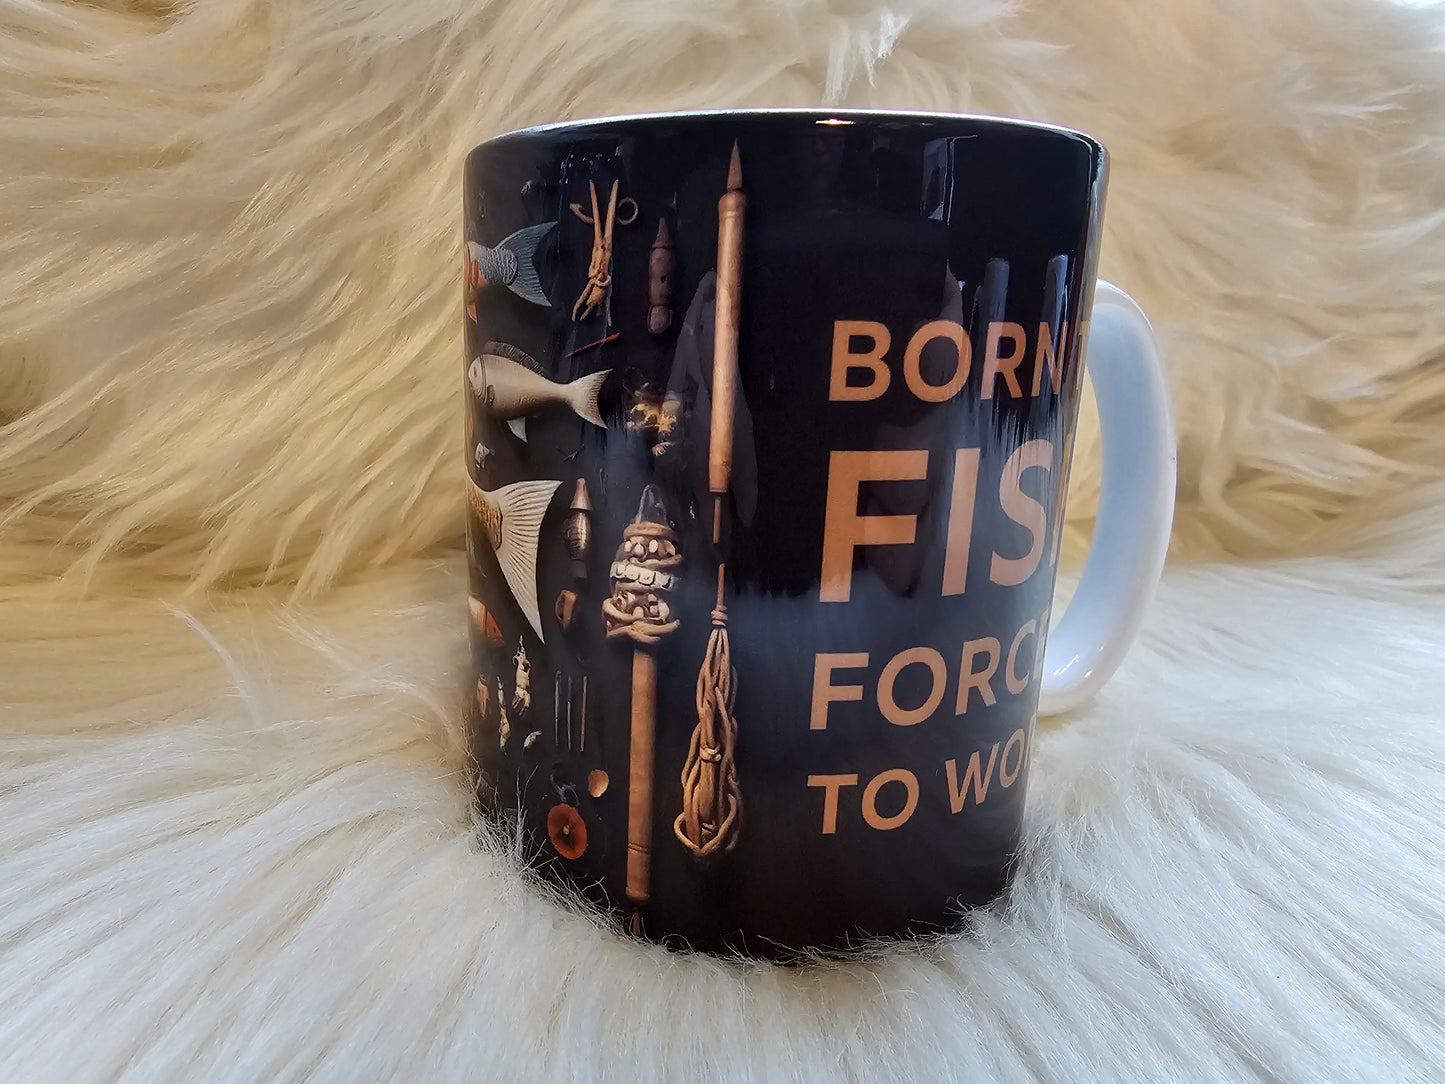 Born to fish forced to work mug